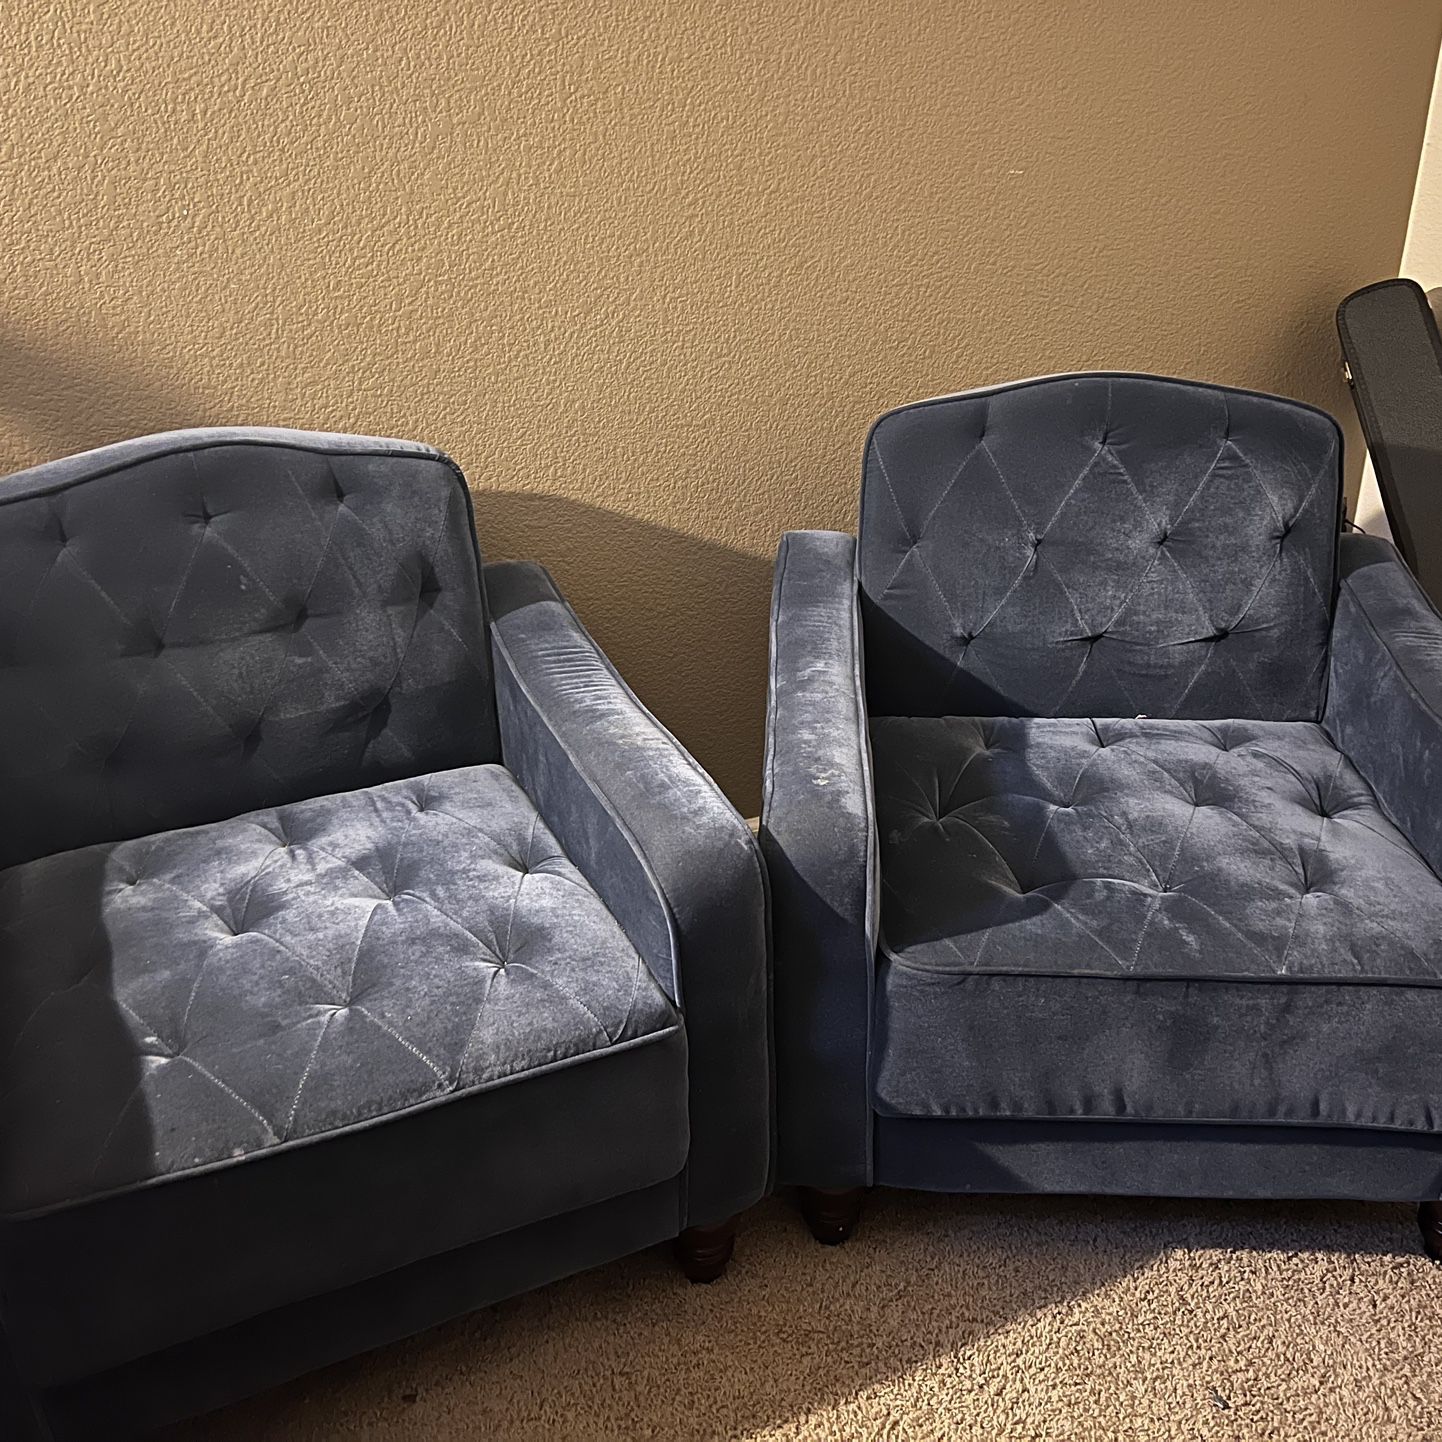 Tufted Blue Upholstered Chairs